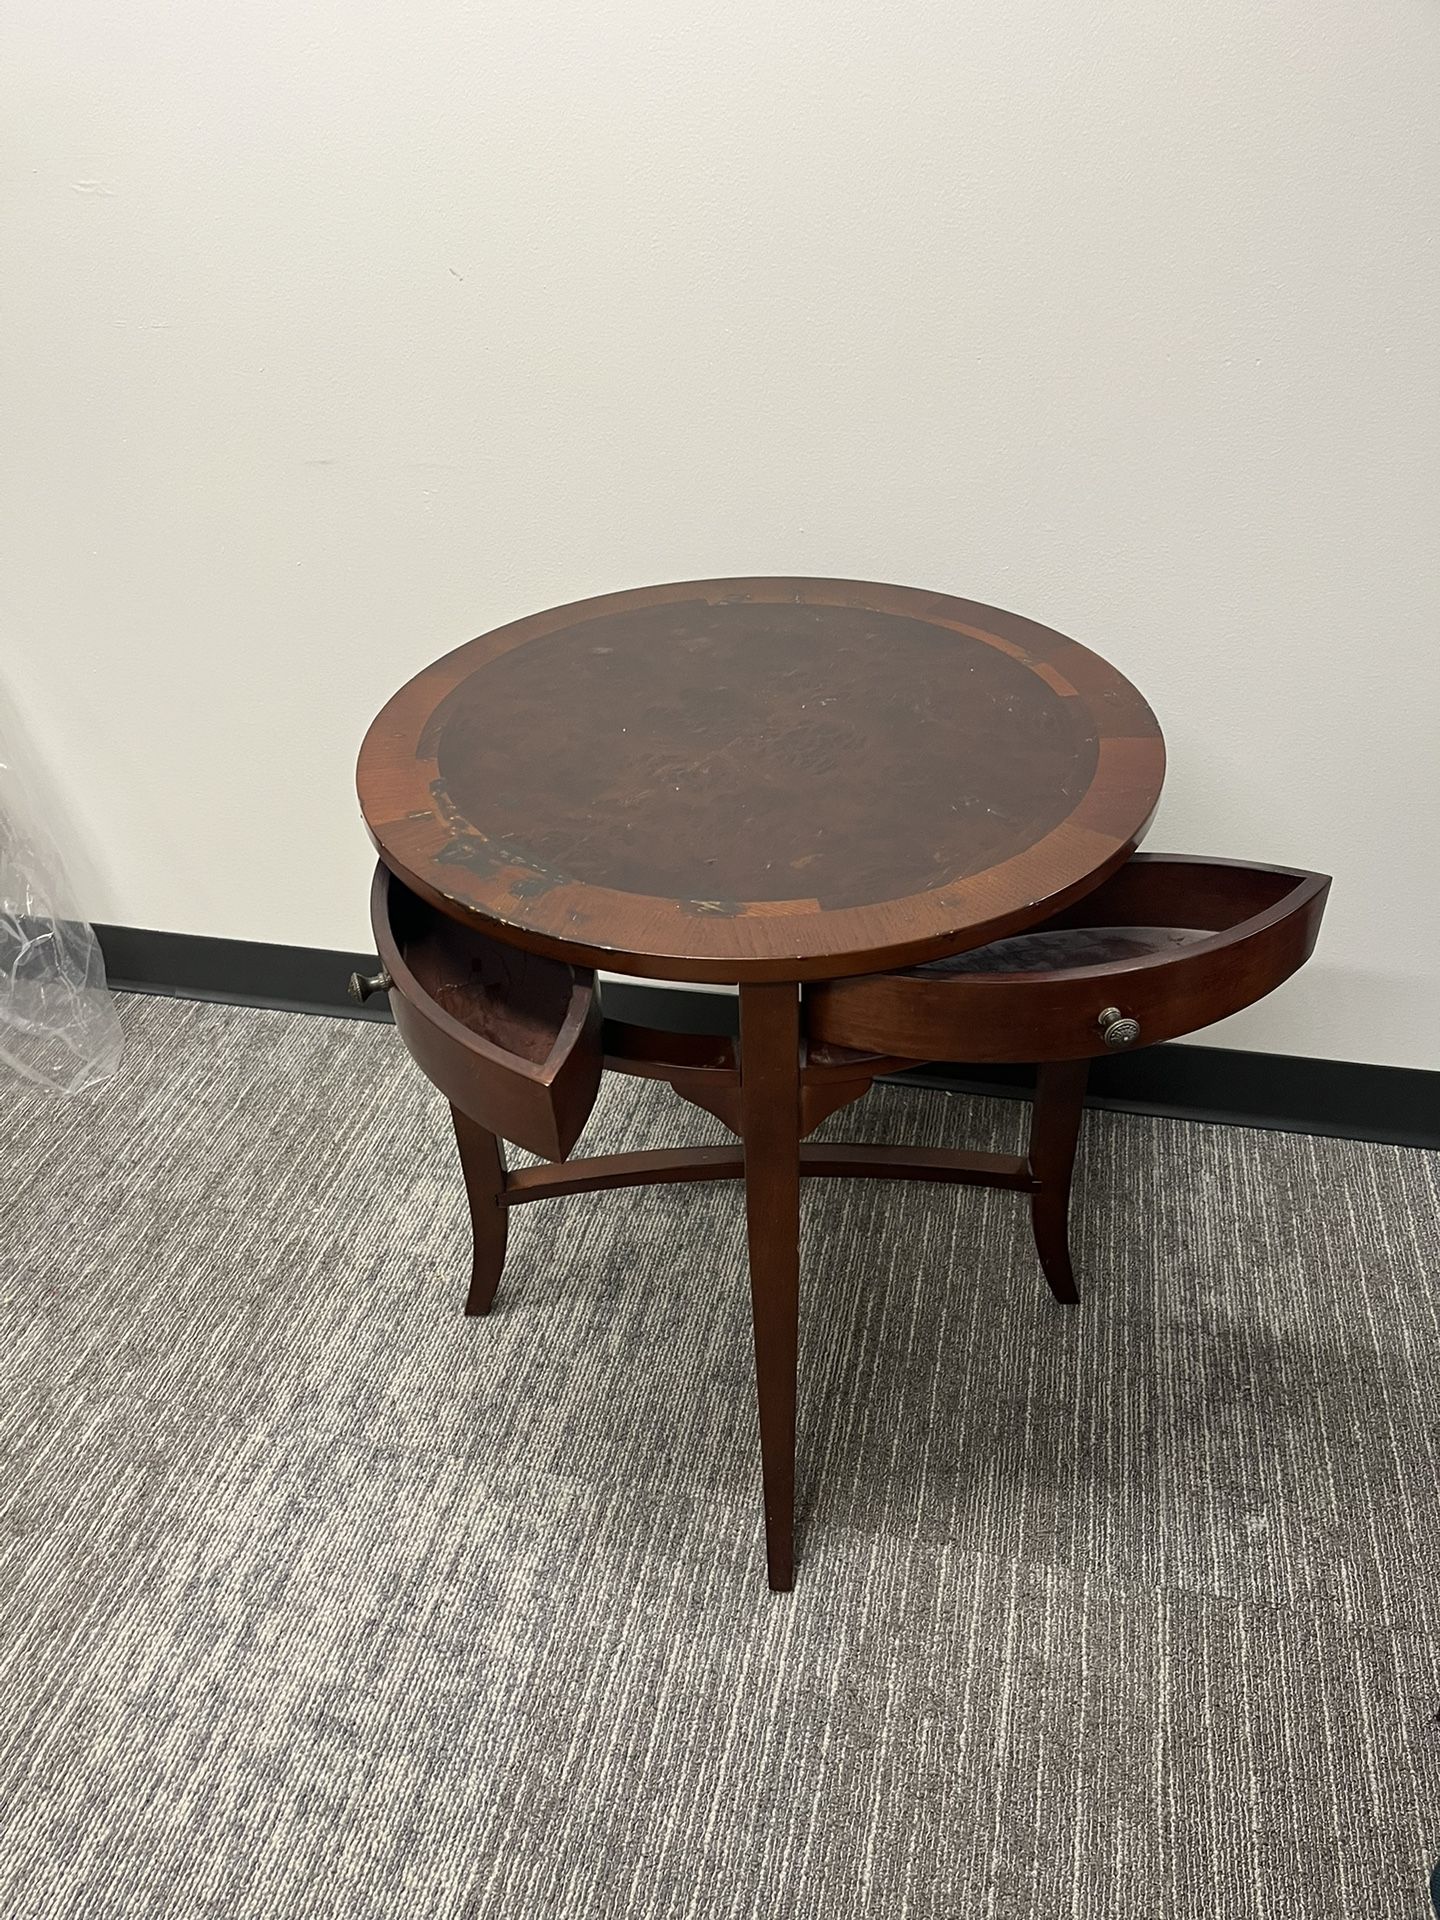 End Table, Small Round Table With Drawers